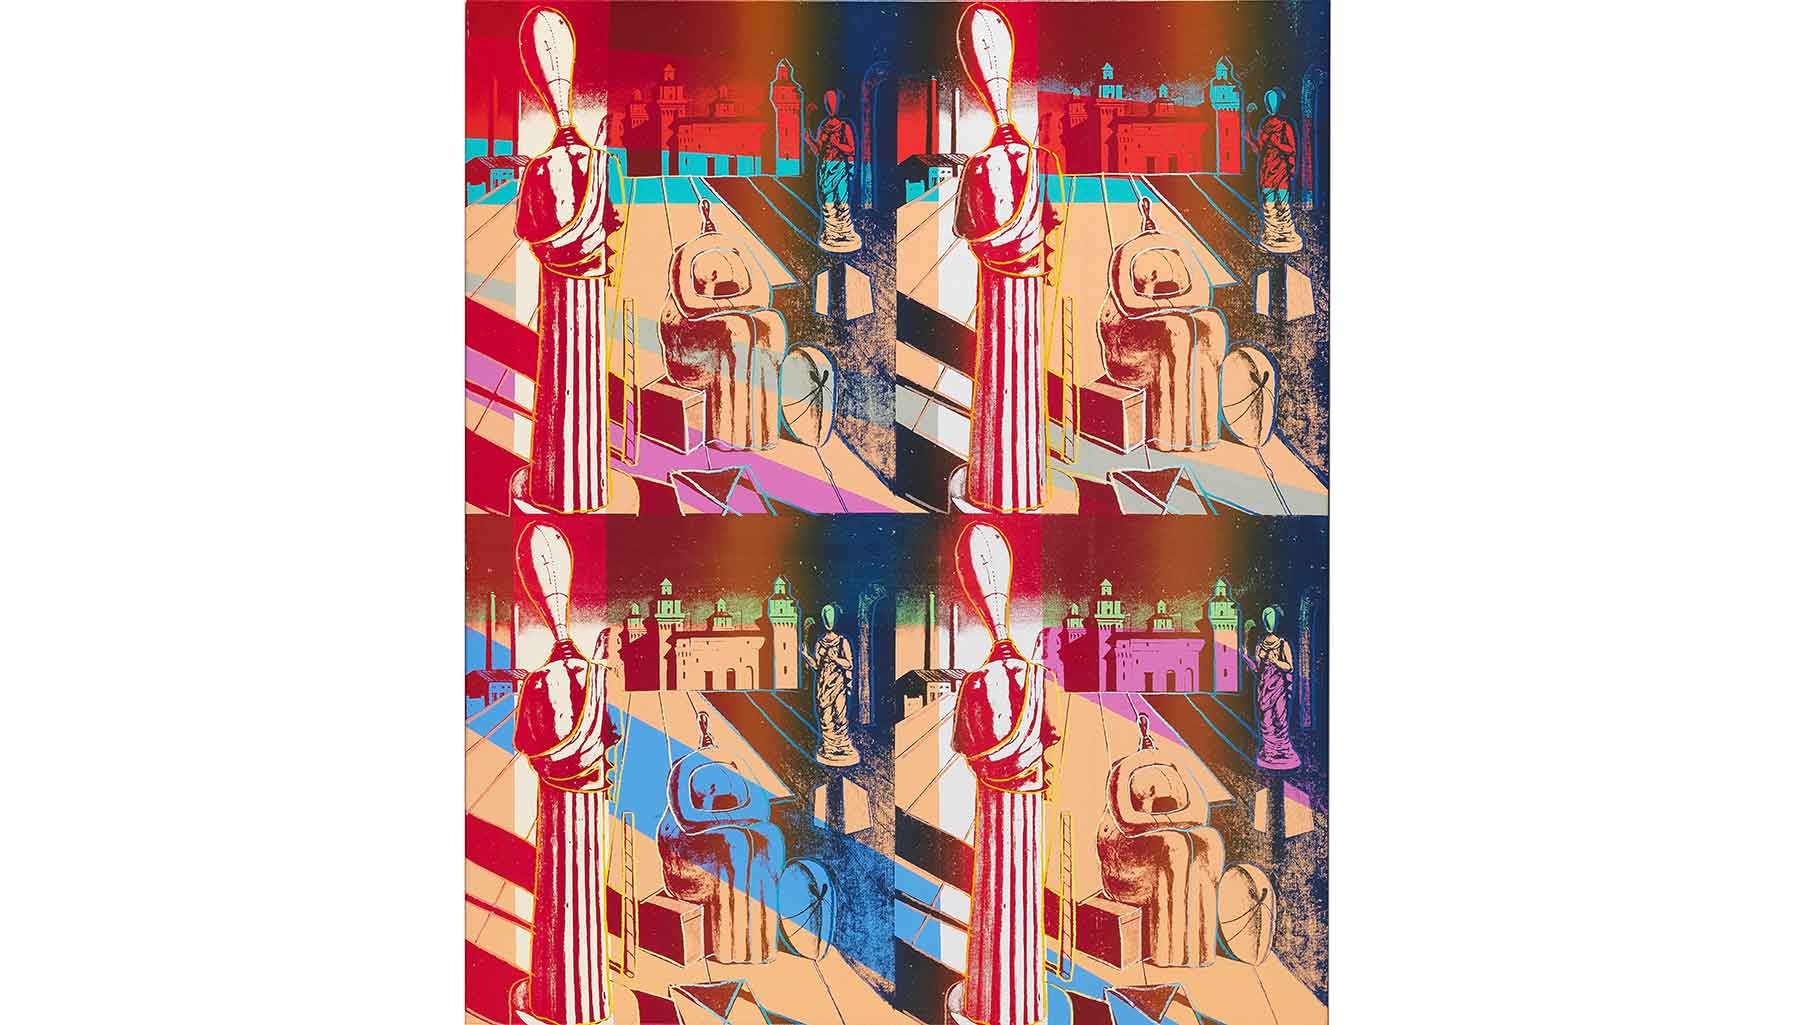 Disquieting Muses (After de Chirico) by Andy Warhol